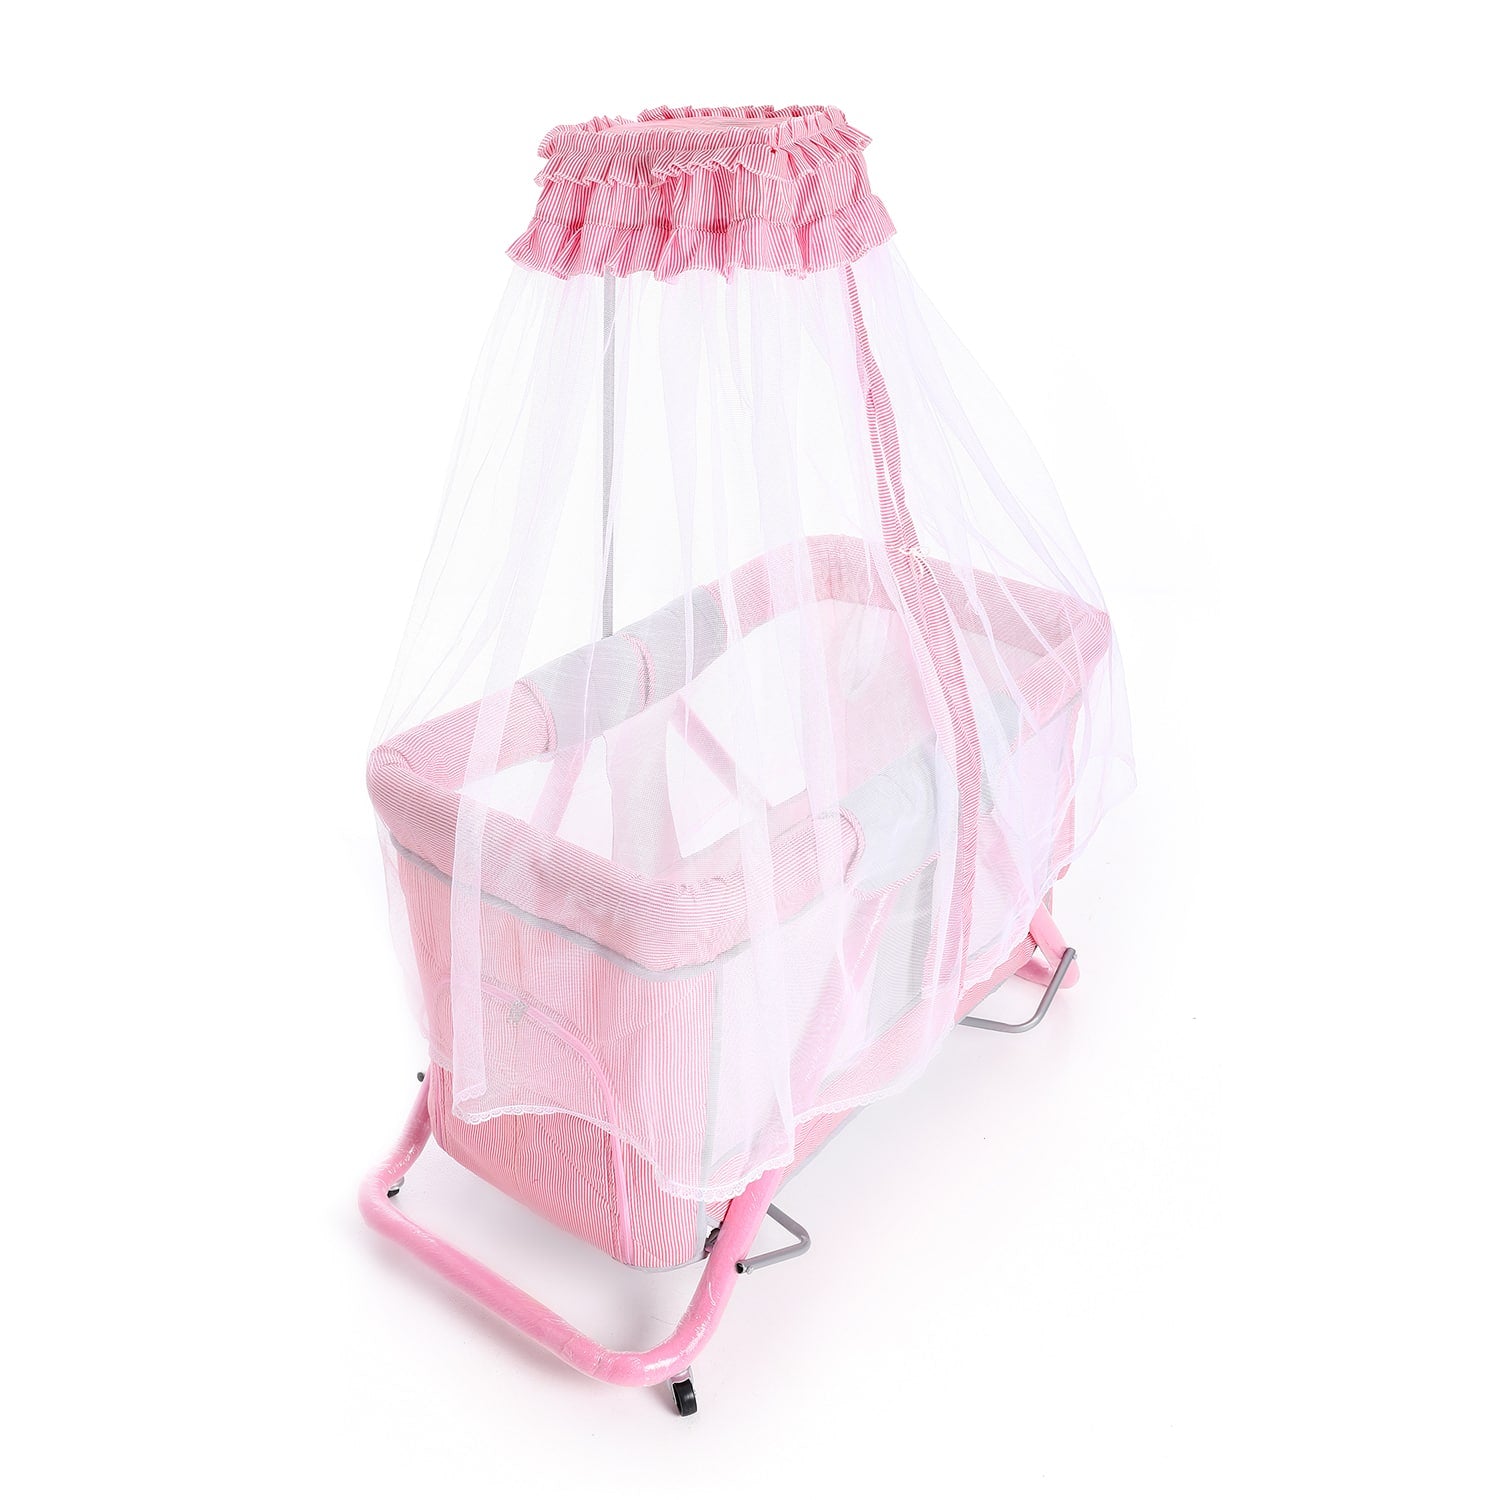 Baby Girl Rectangular Foldable Bed with Mosquito Net - Pink